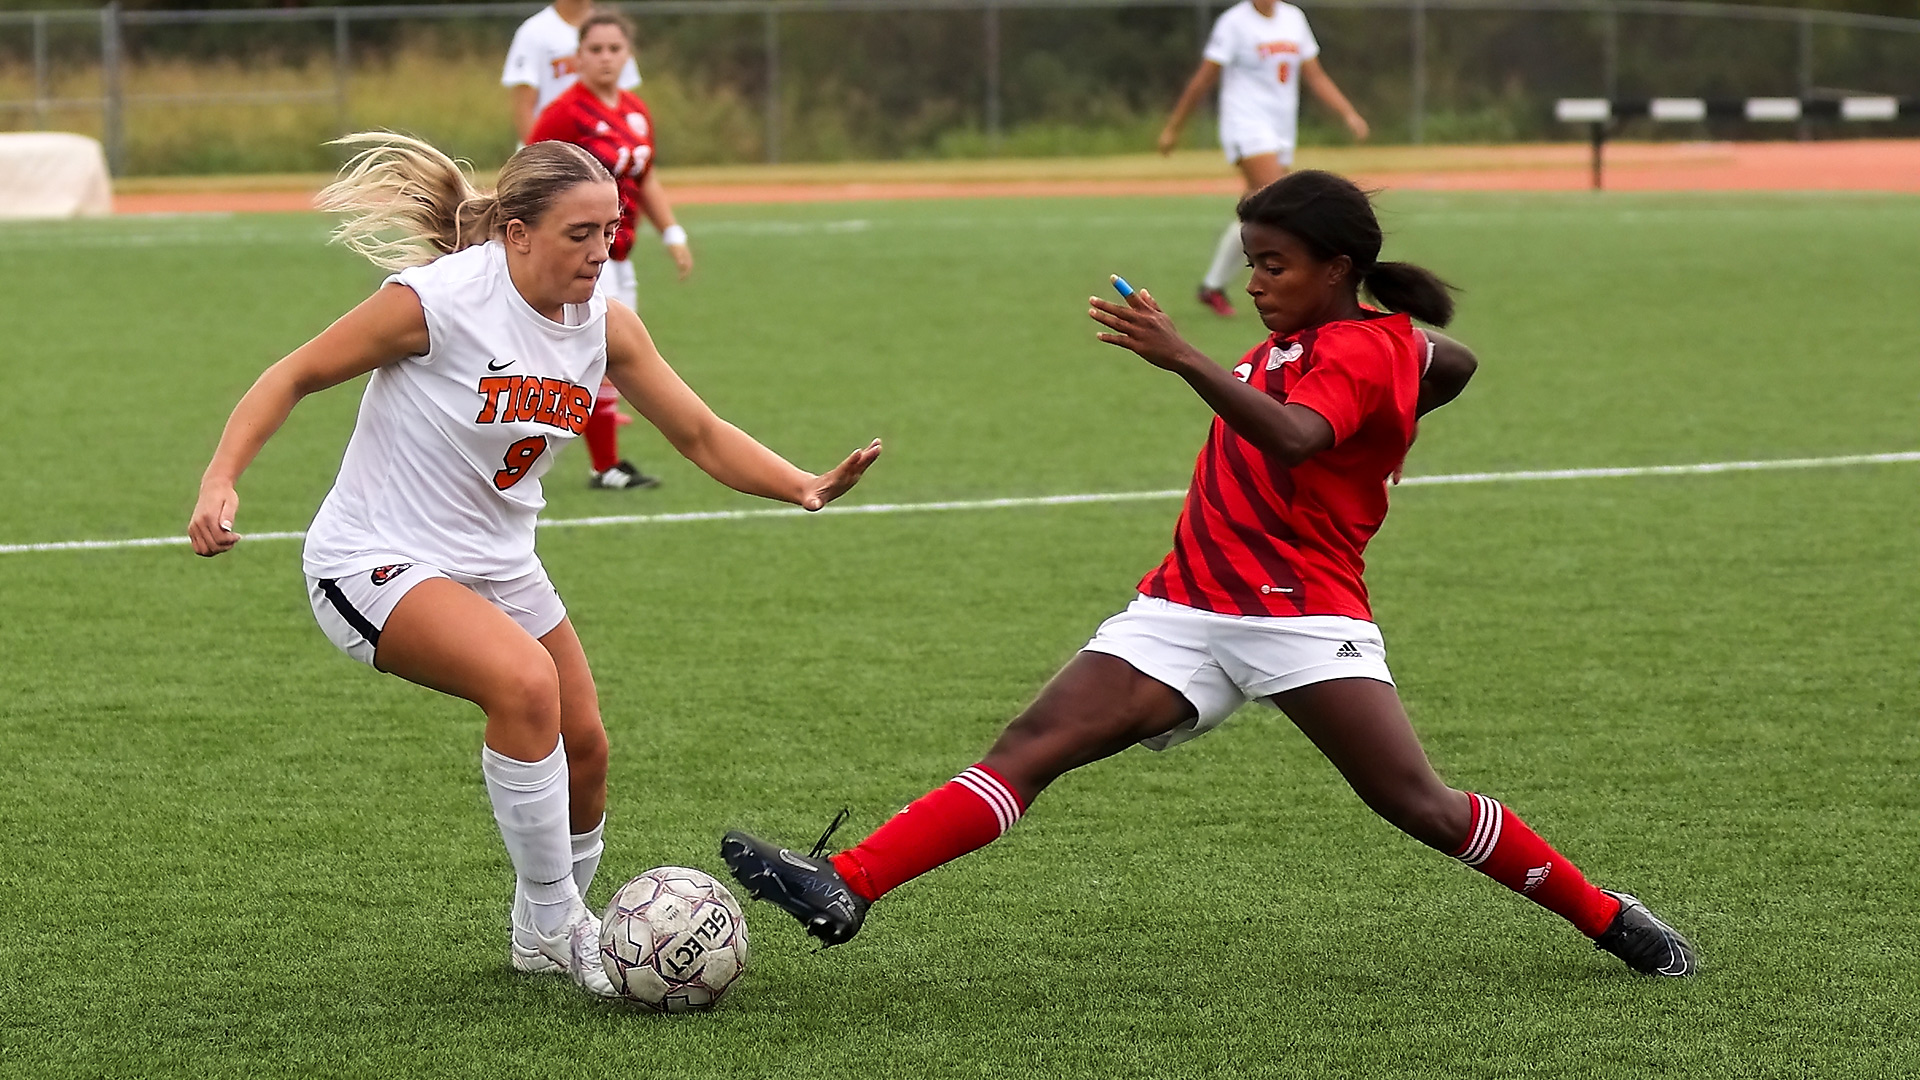 A pair of late goals lifts the Lady Tiger soccer team to a 3-1 road win